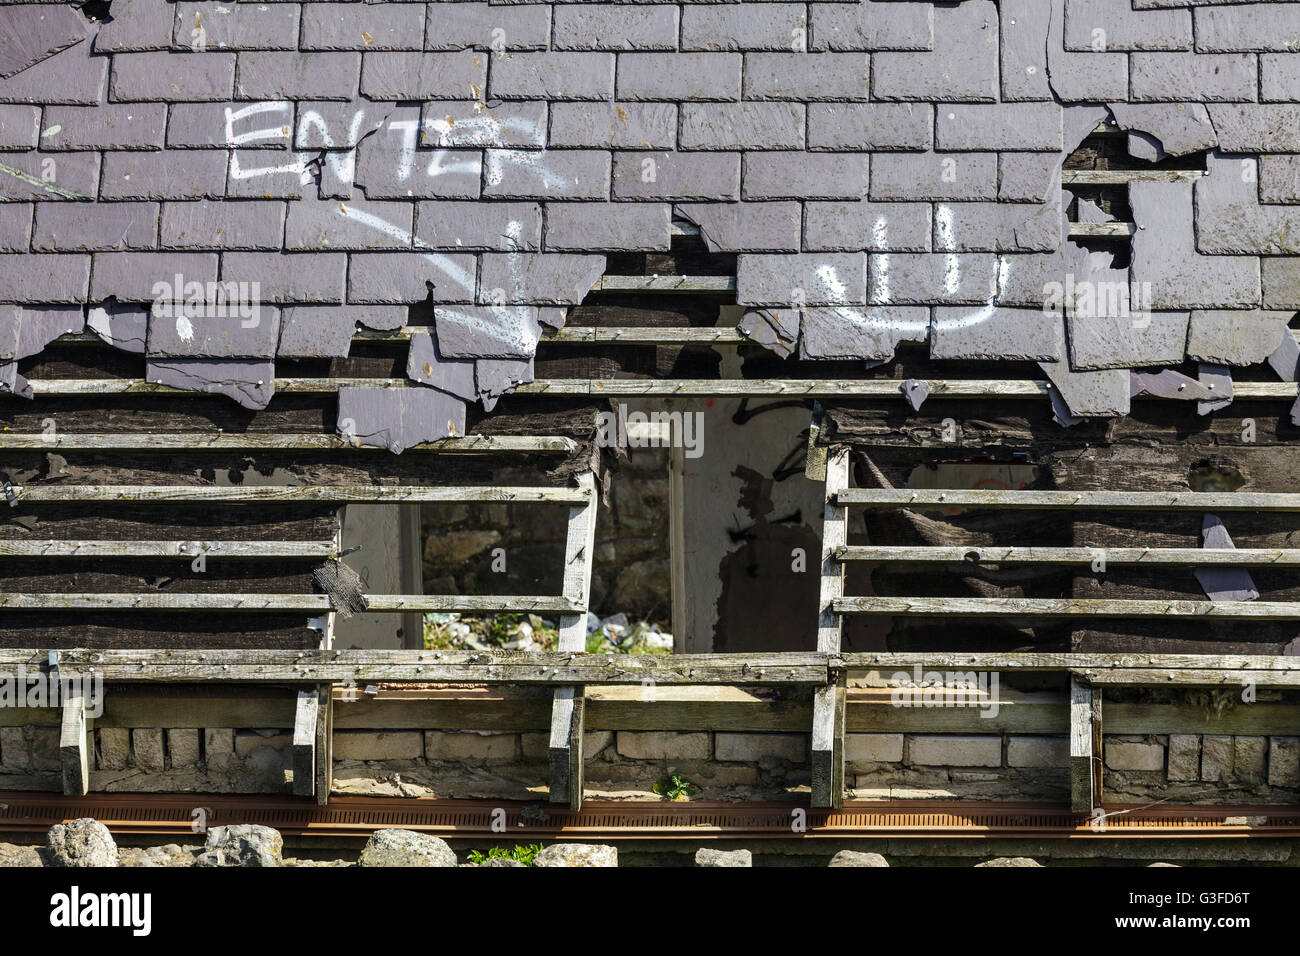 Derelict Buildiing with Enter sign through roof Stock Photo